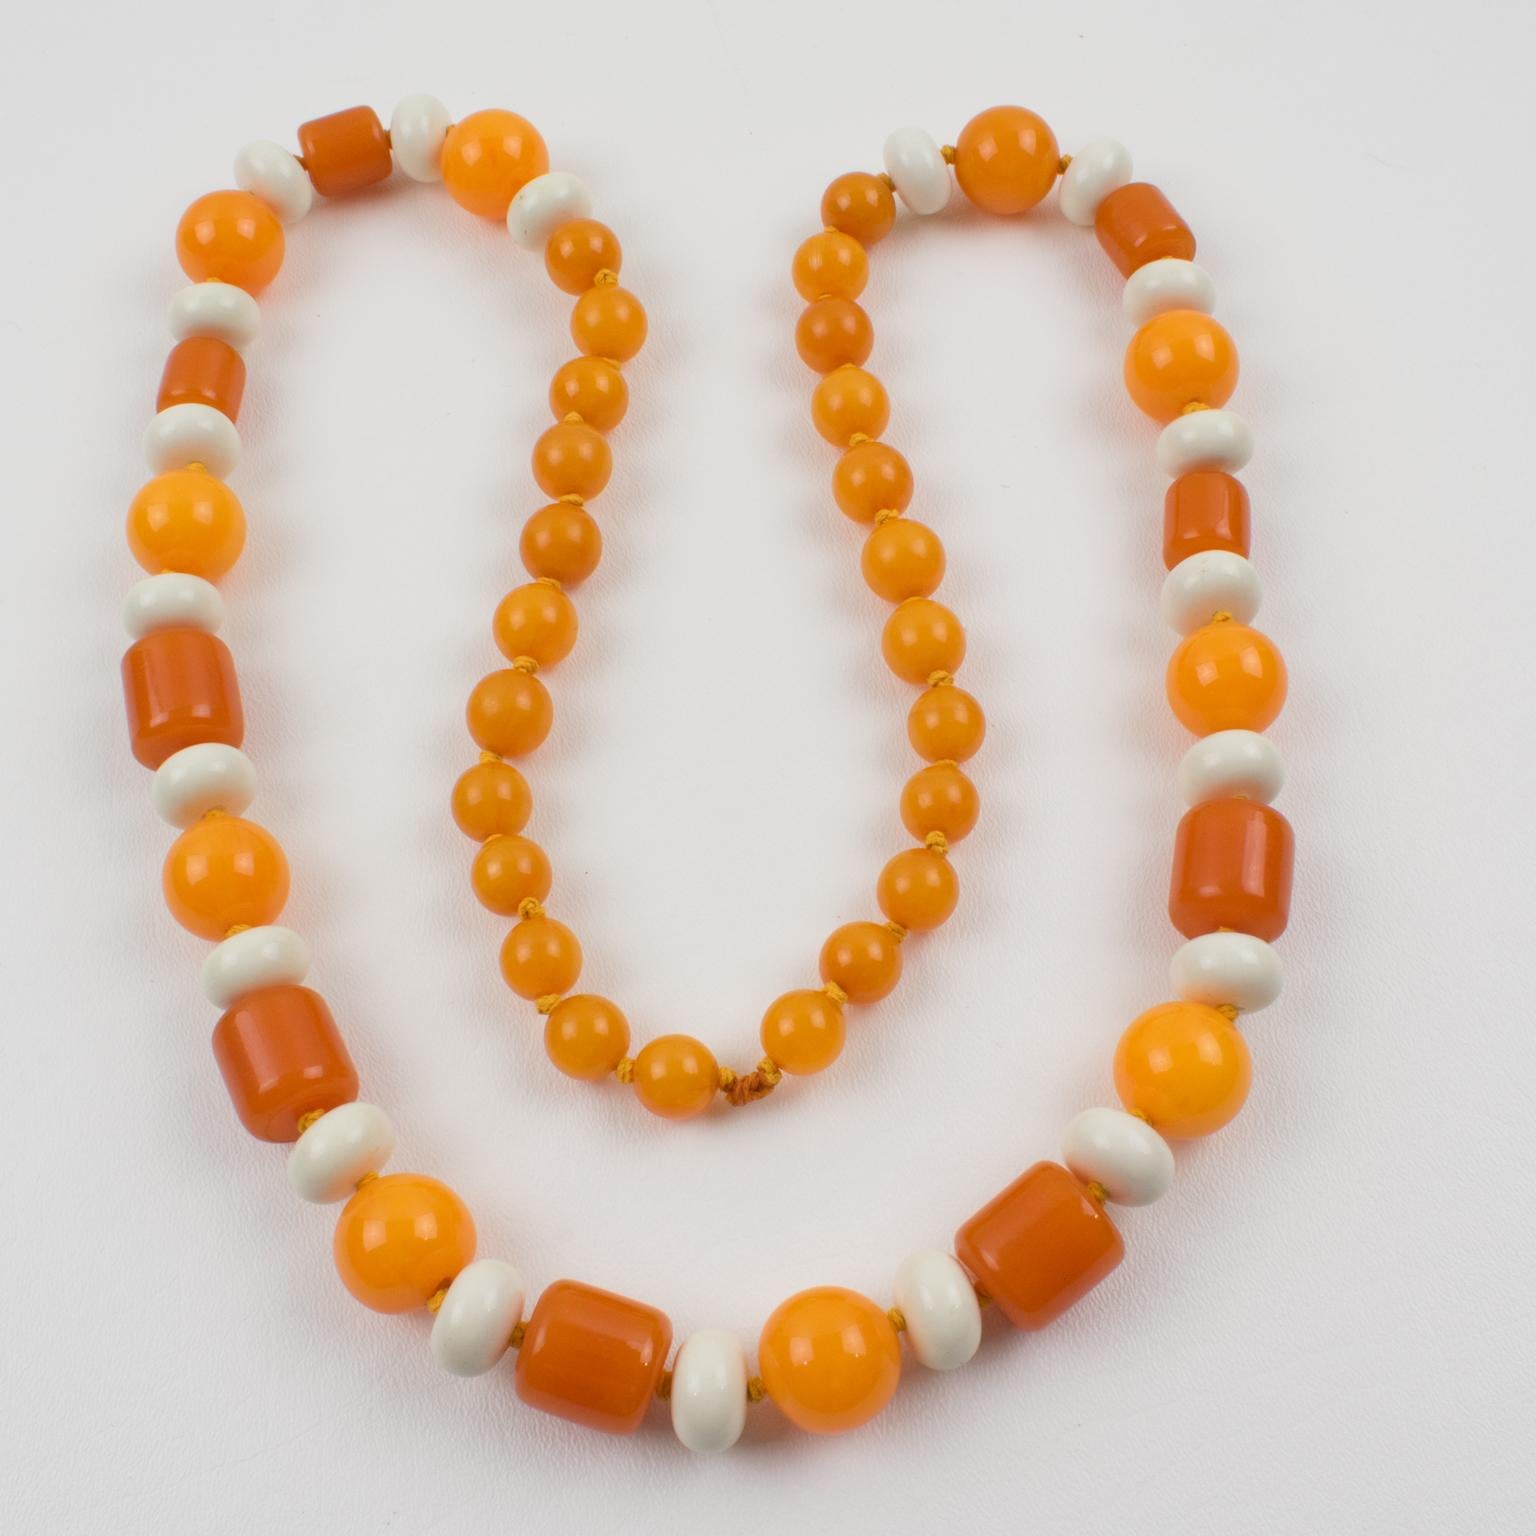 This lovely extra-long Bakelite and Lucite necklace features assorted beads in various carved shapes: round, tomato, and stick. The mix and match of bright, sunny colors boast tangerine orange marble, milky orange marble, and burnt orange marble